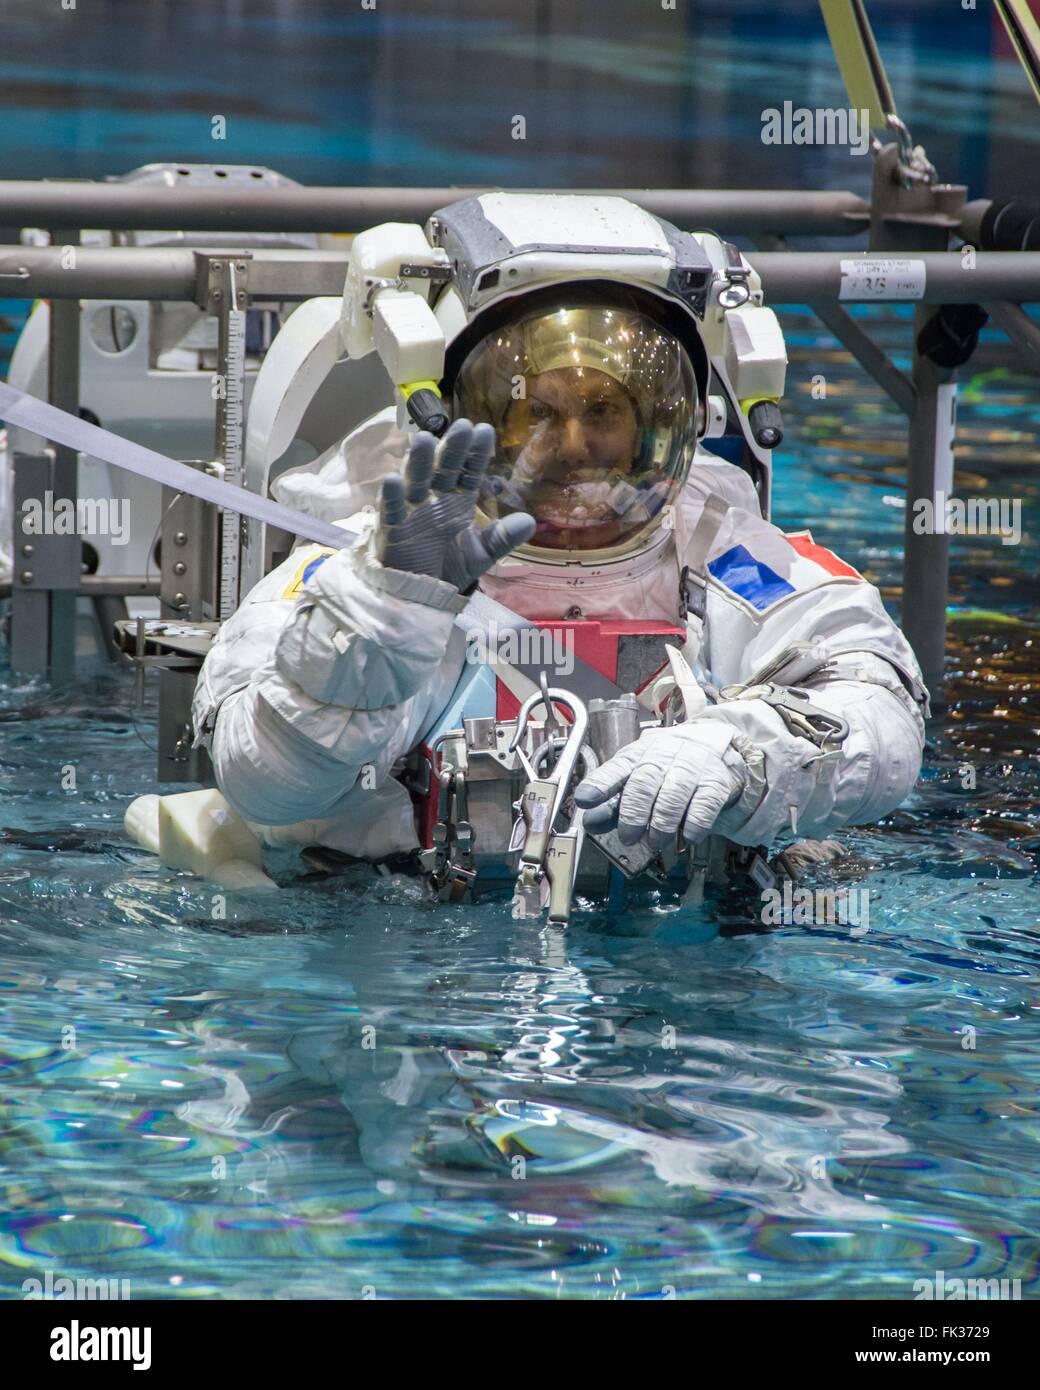 ESA astronaut Thomas Pesquet in his Extravehicular Mobility Unit space suit during ISS EVA maintenance training at the Neutral Buoyancy Laboratory Johnson Space Center January 12, 2016 in Houston, Texas. Stock Photo